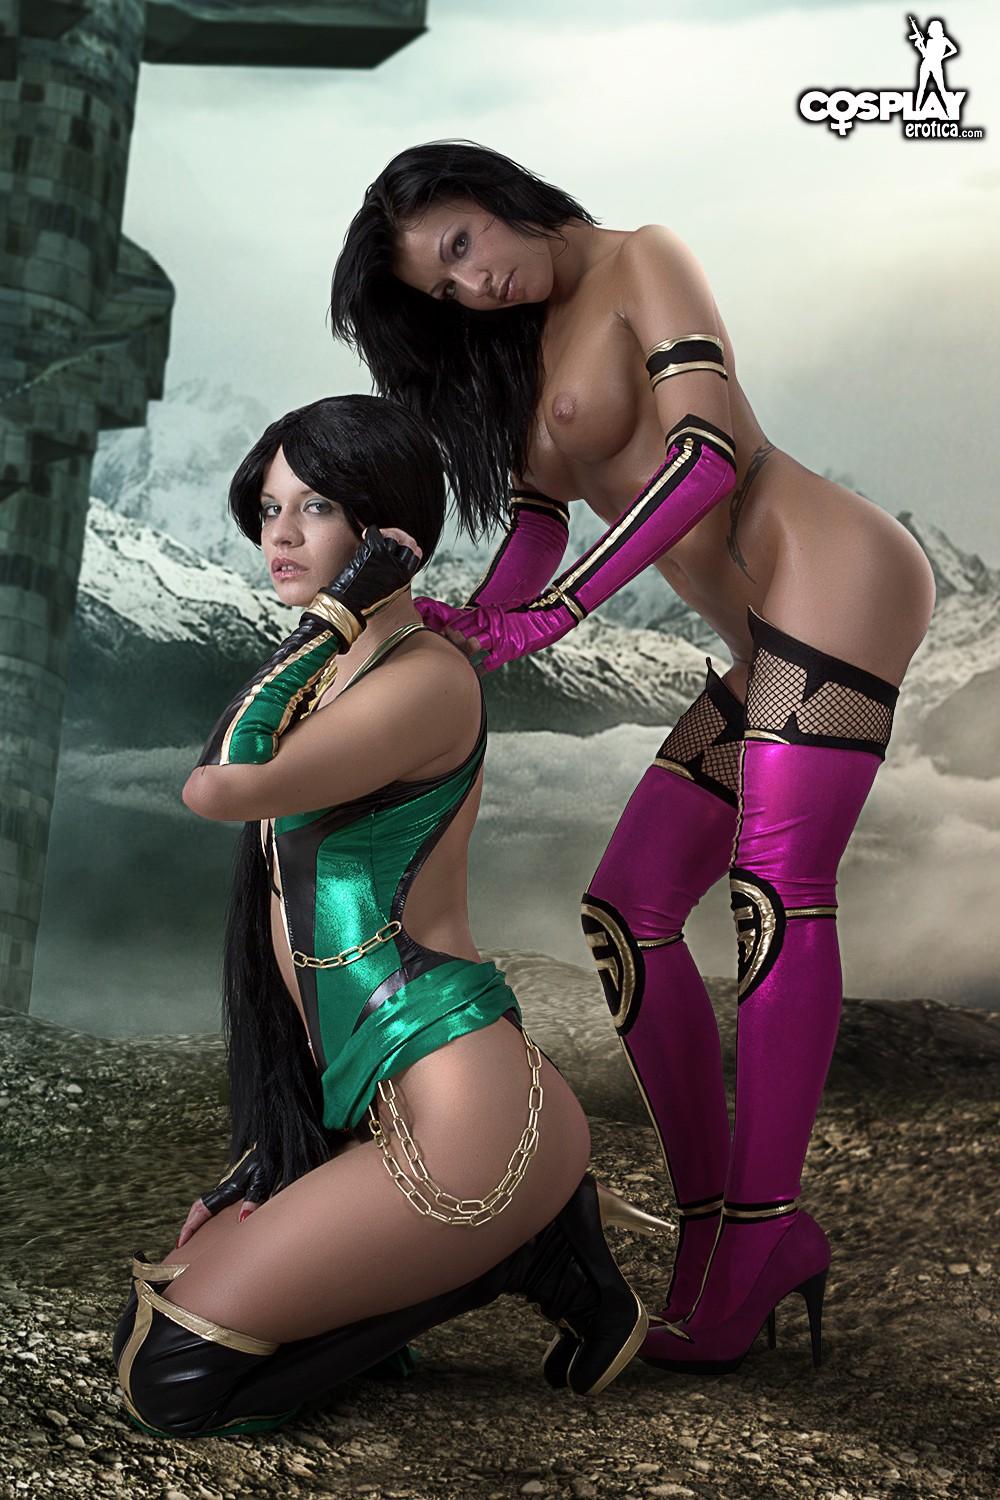 Sexy cosplayers Mea Lee and Ginger dress up as Mileena and Jade #54531328